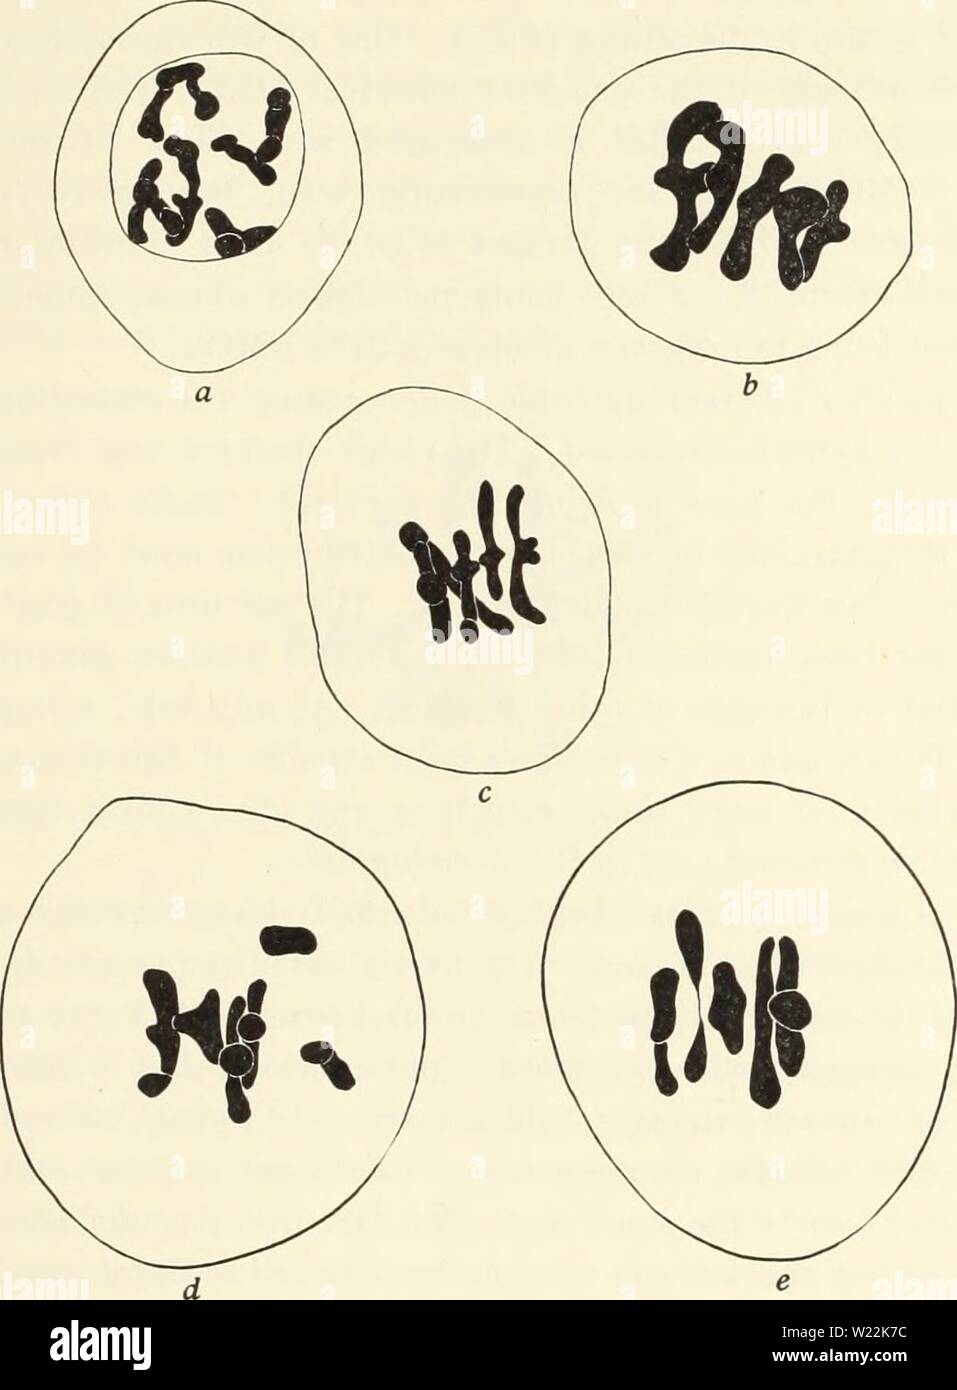 Archive image from page 22 of Cytological studies of five interspecific. Cytological studies of five interspecific hybrids of Crepis leontodontoides  cytologicalstudi65aver Year: 1930  1930] Avery: Hybrids of Crepis leontodontoides 155 Meiosis In meiotic divisions the chromosomes of the two species cannot be distinguished. In contrast to the other hybrids there is great regularity in meiosis. At diakinesis 5n or 4n + 2r are seen. In figure 15a one pair of chromosomes appears to be only loosely associated    Fig. 15. Meiosis in Ft C. leontodontoides-aurea. a, diakinesis, with five pairs, one pa Stock Photo